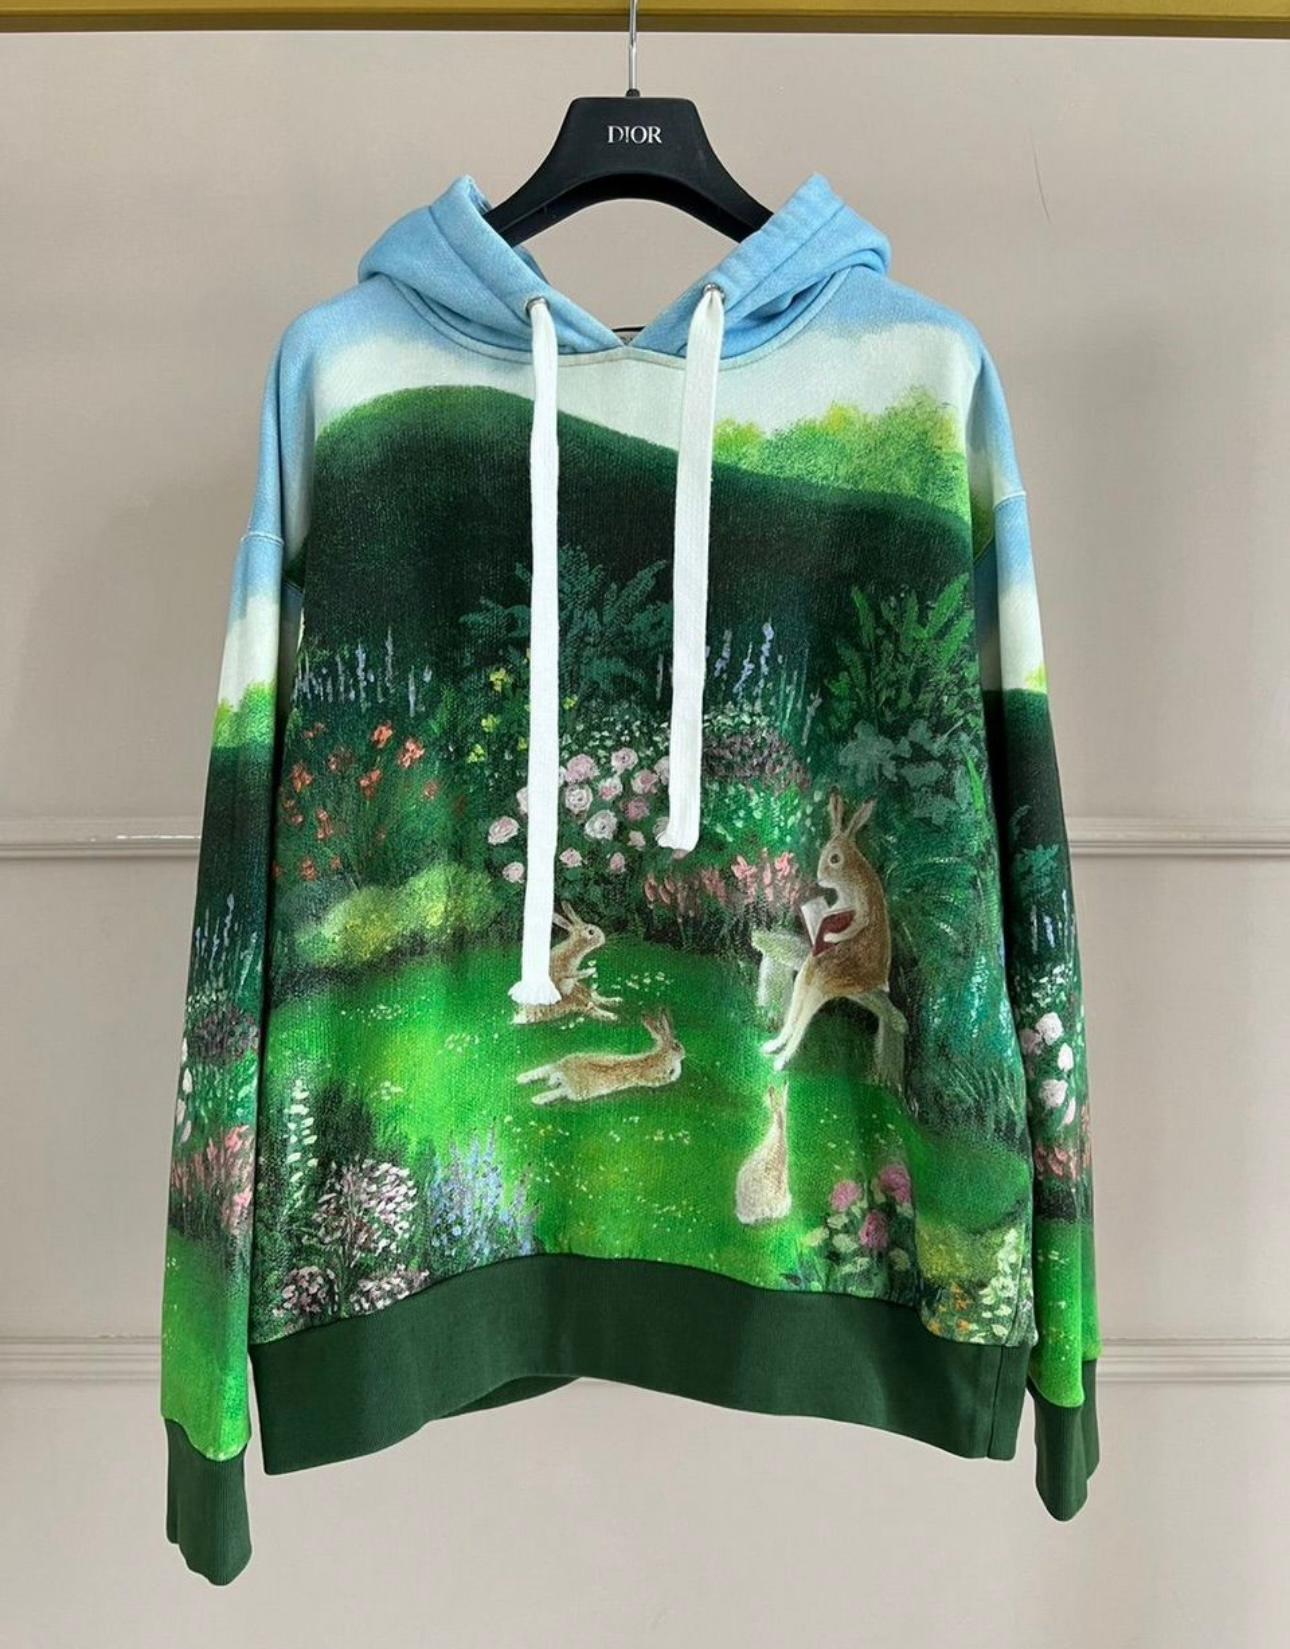 Gucci Garden collectible  hoodie with hand-painted ironic pattern. Boutique was was ca. 2,600$
Size mark S. Condition is pristine.